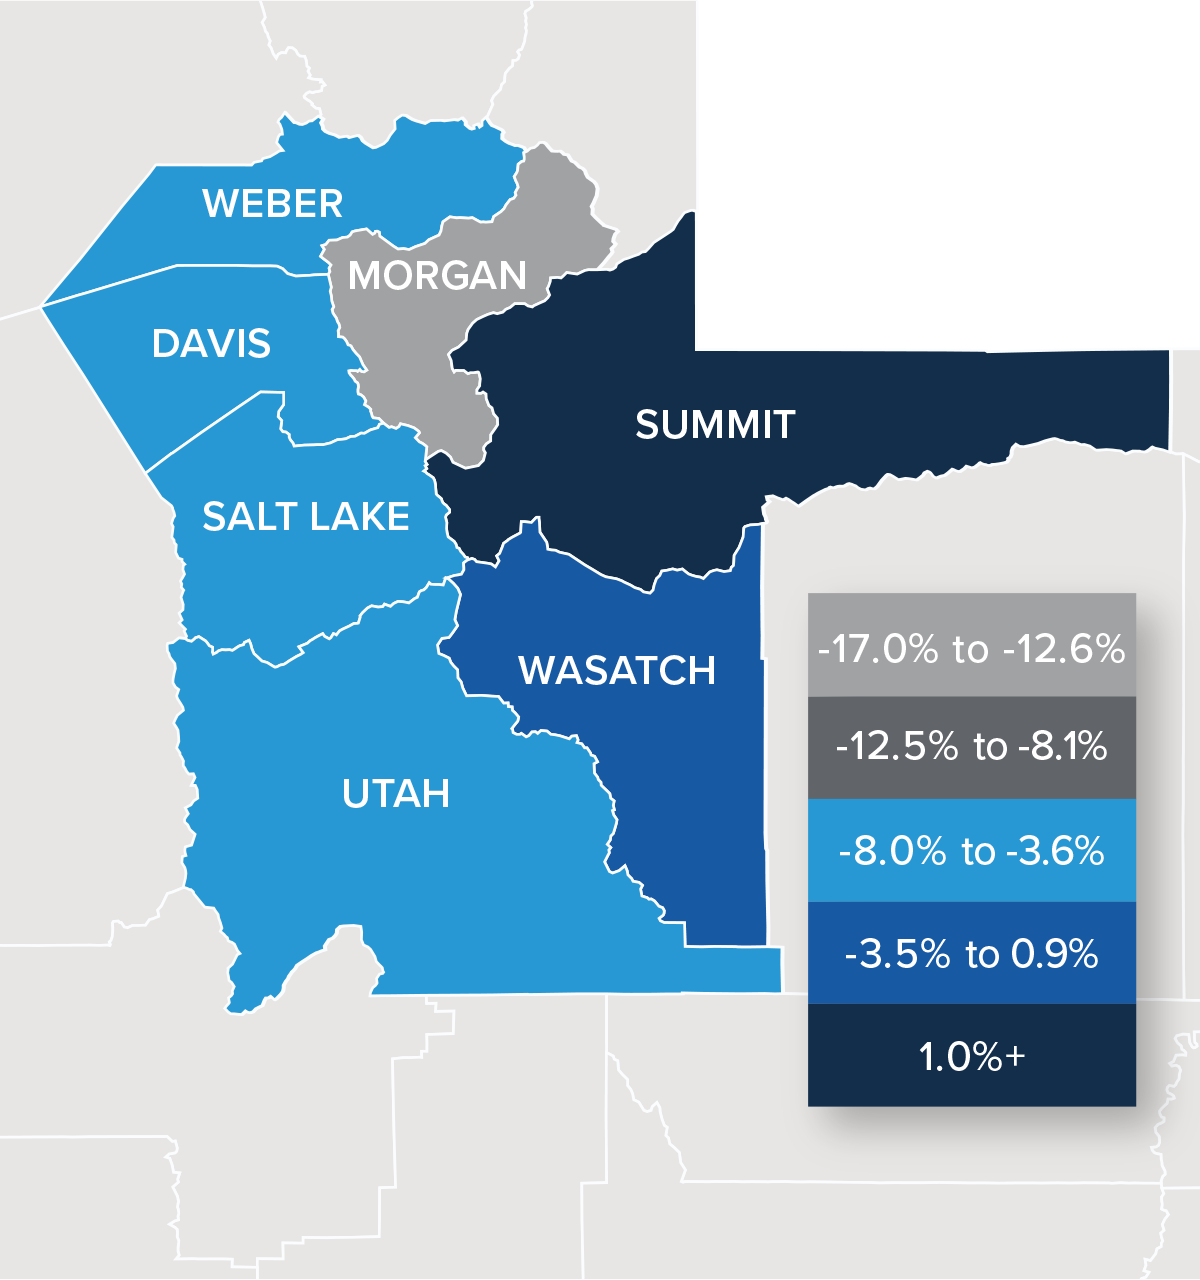 A map showing the real estate home prices percentage changes for various counties in Utah. Different colors correspond to different tiers of percentage change. Morgan had a percentage change in the -17% to -12.6% range. Weber, Davis, Salty Lake, and Utah were in the -8% to -3.6% change range. Wasatch was in the -3.5% to 0.9% change range. Summit was in the 1%+ change range.